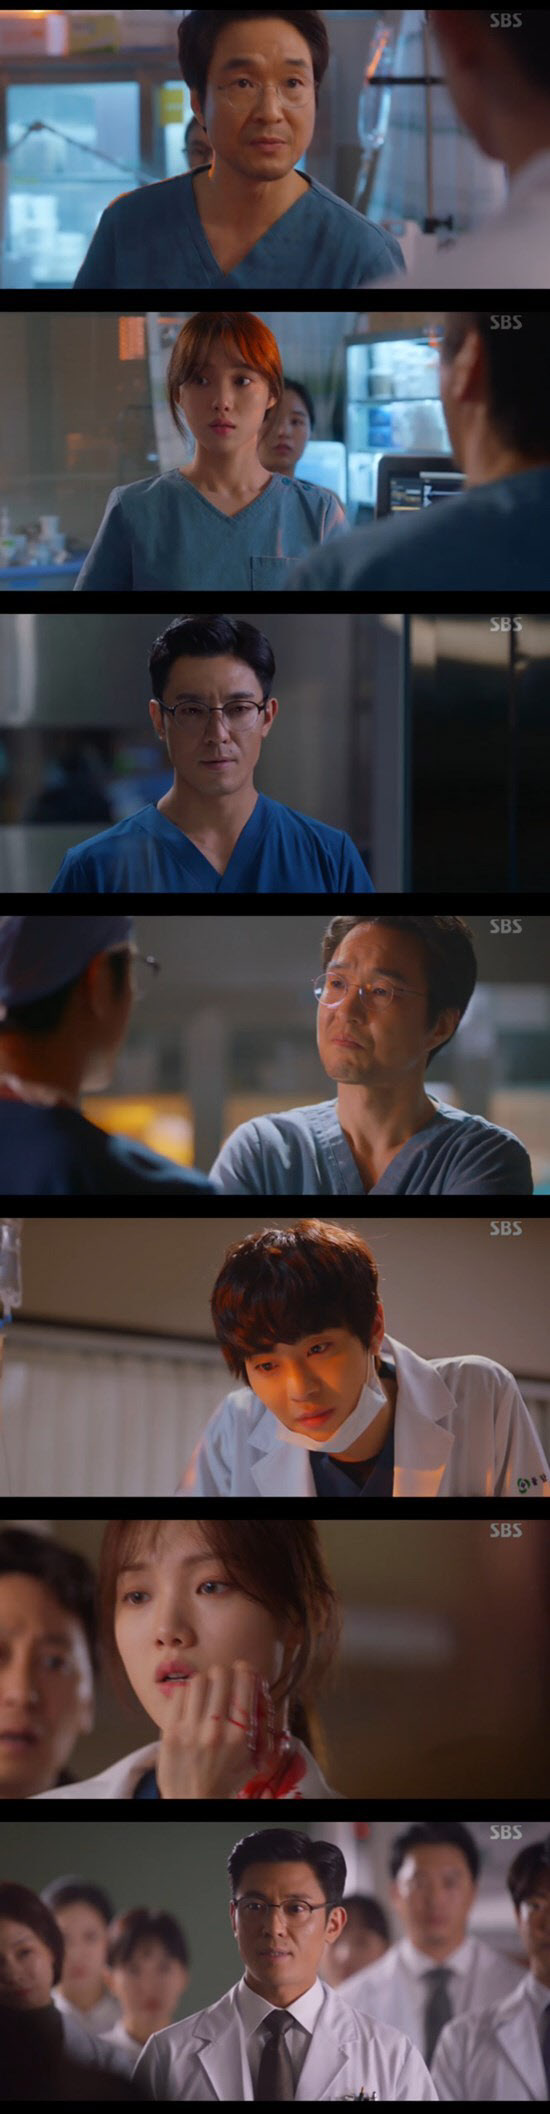 Lee Sung-kyung, a romantic doctor, overcame Nausea thanks to Han Suk-kyu, but suffered a neck injury to a patients knife.In addition, Kim Ju-Hun took the post of director of Doldam Hospital, foreshadowing system reform, and foreshadowing conflicts with Han Suk-kyu.Kim Sabu (Bu Yong-ju, Han Suk-kyu), who left the surgery to Seo Woo-jin (Ahn Hyo-seop), came down to the emergency room and finished the situation.Kim Sabu decided to operate on a patient with a gunshot wound, and Park Min-guk opposed it, saying it is meaningless to operate on a patient who can not already use his hands.Kim said to Park Min-guk, The moment you give up, you find a way to find a excuse, and you think you can do it.Dont look for excuses to run away, he said.In the end, Cha Eun-jae (Lee Sung-kyung) was given the surgery of Navajazo under the direction of Kim Sa-bu. Cha Eun-jae took the medicine that Kim Sa-bu gave him.Then, Cha Eun-jae believed in Kim Sabu, who believed in himself even in the worries around him, and performed emergency surgery at the emergency room.Cha Eun-jae, who succeeded in his role, moved Navajazo patient to the operating room according to Kim Sabus instructions.Kim had left the surgery of the gunshot wound patient to Park Min-guk, saying, Do your duty. Park Min-guk led the operating room, and Kim Sa-bu moved to the operating room of Navajazo.Kim praised Cha for his treatment. Cha laughed, saying, There are no more Nausea and co-works.Park Min-guk finished the surgery and declared to Kim Sa-bu that he would change the system of the old-fashioned system of the Doldam Hospital. Park Min-guk said, Doctor Bu Yong-ju, I should control your crazy things.Kim Sabu said, Kim Sabu, everyone here calls me that.When the father, who attempted to commit suicide, opened his eyes after completing the surgery safely, he said, I can not know if I die like this. What did I do. Family suicide?Dont be ridiculous. Hes been violent and murdering powerless people. Dont make excuses. Youre weak and bad.Youll have to pay for it all your life, and youll be fair to the dead.Oh Myung-sim (Jin Kyung-min) noticed the absence of Yeo Un-yeong (Kim Hong-pa). Oh received a letter from Yeo Un-yeong and howled.Nam Do-il (played by Byun Woo-min) persuaded him of the stigma that he did not understand Yeo Un-yeongs decision.On the other hand, Cha Eun-jae found a guardian who suffered domestic violence from her husband and asked her husband about it.The victim was angry and swung the knife at her husband, and the knife was hit on behalf of the car, and the blood was spilled on her neck and fell into crisis.Park Min-guk officially appeared as the director of the Doldam Hospital on the day, and Park Min-guk was cheered by the Doldam Hospital staff for promising to raise his salary along with improving treatment.On the other hand, SBS Romantic Doctor Kim Sabu 2 is a drama depicting the story of Real Doctor in the background of a poor stone wall hospital in the province. It will be broadcast every Monday and Tuesday at 9:40 pm.